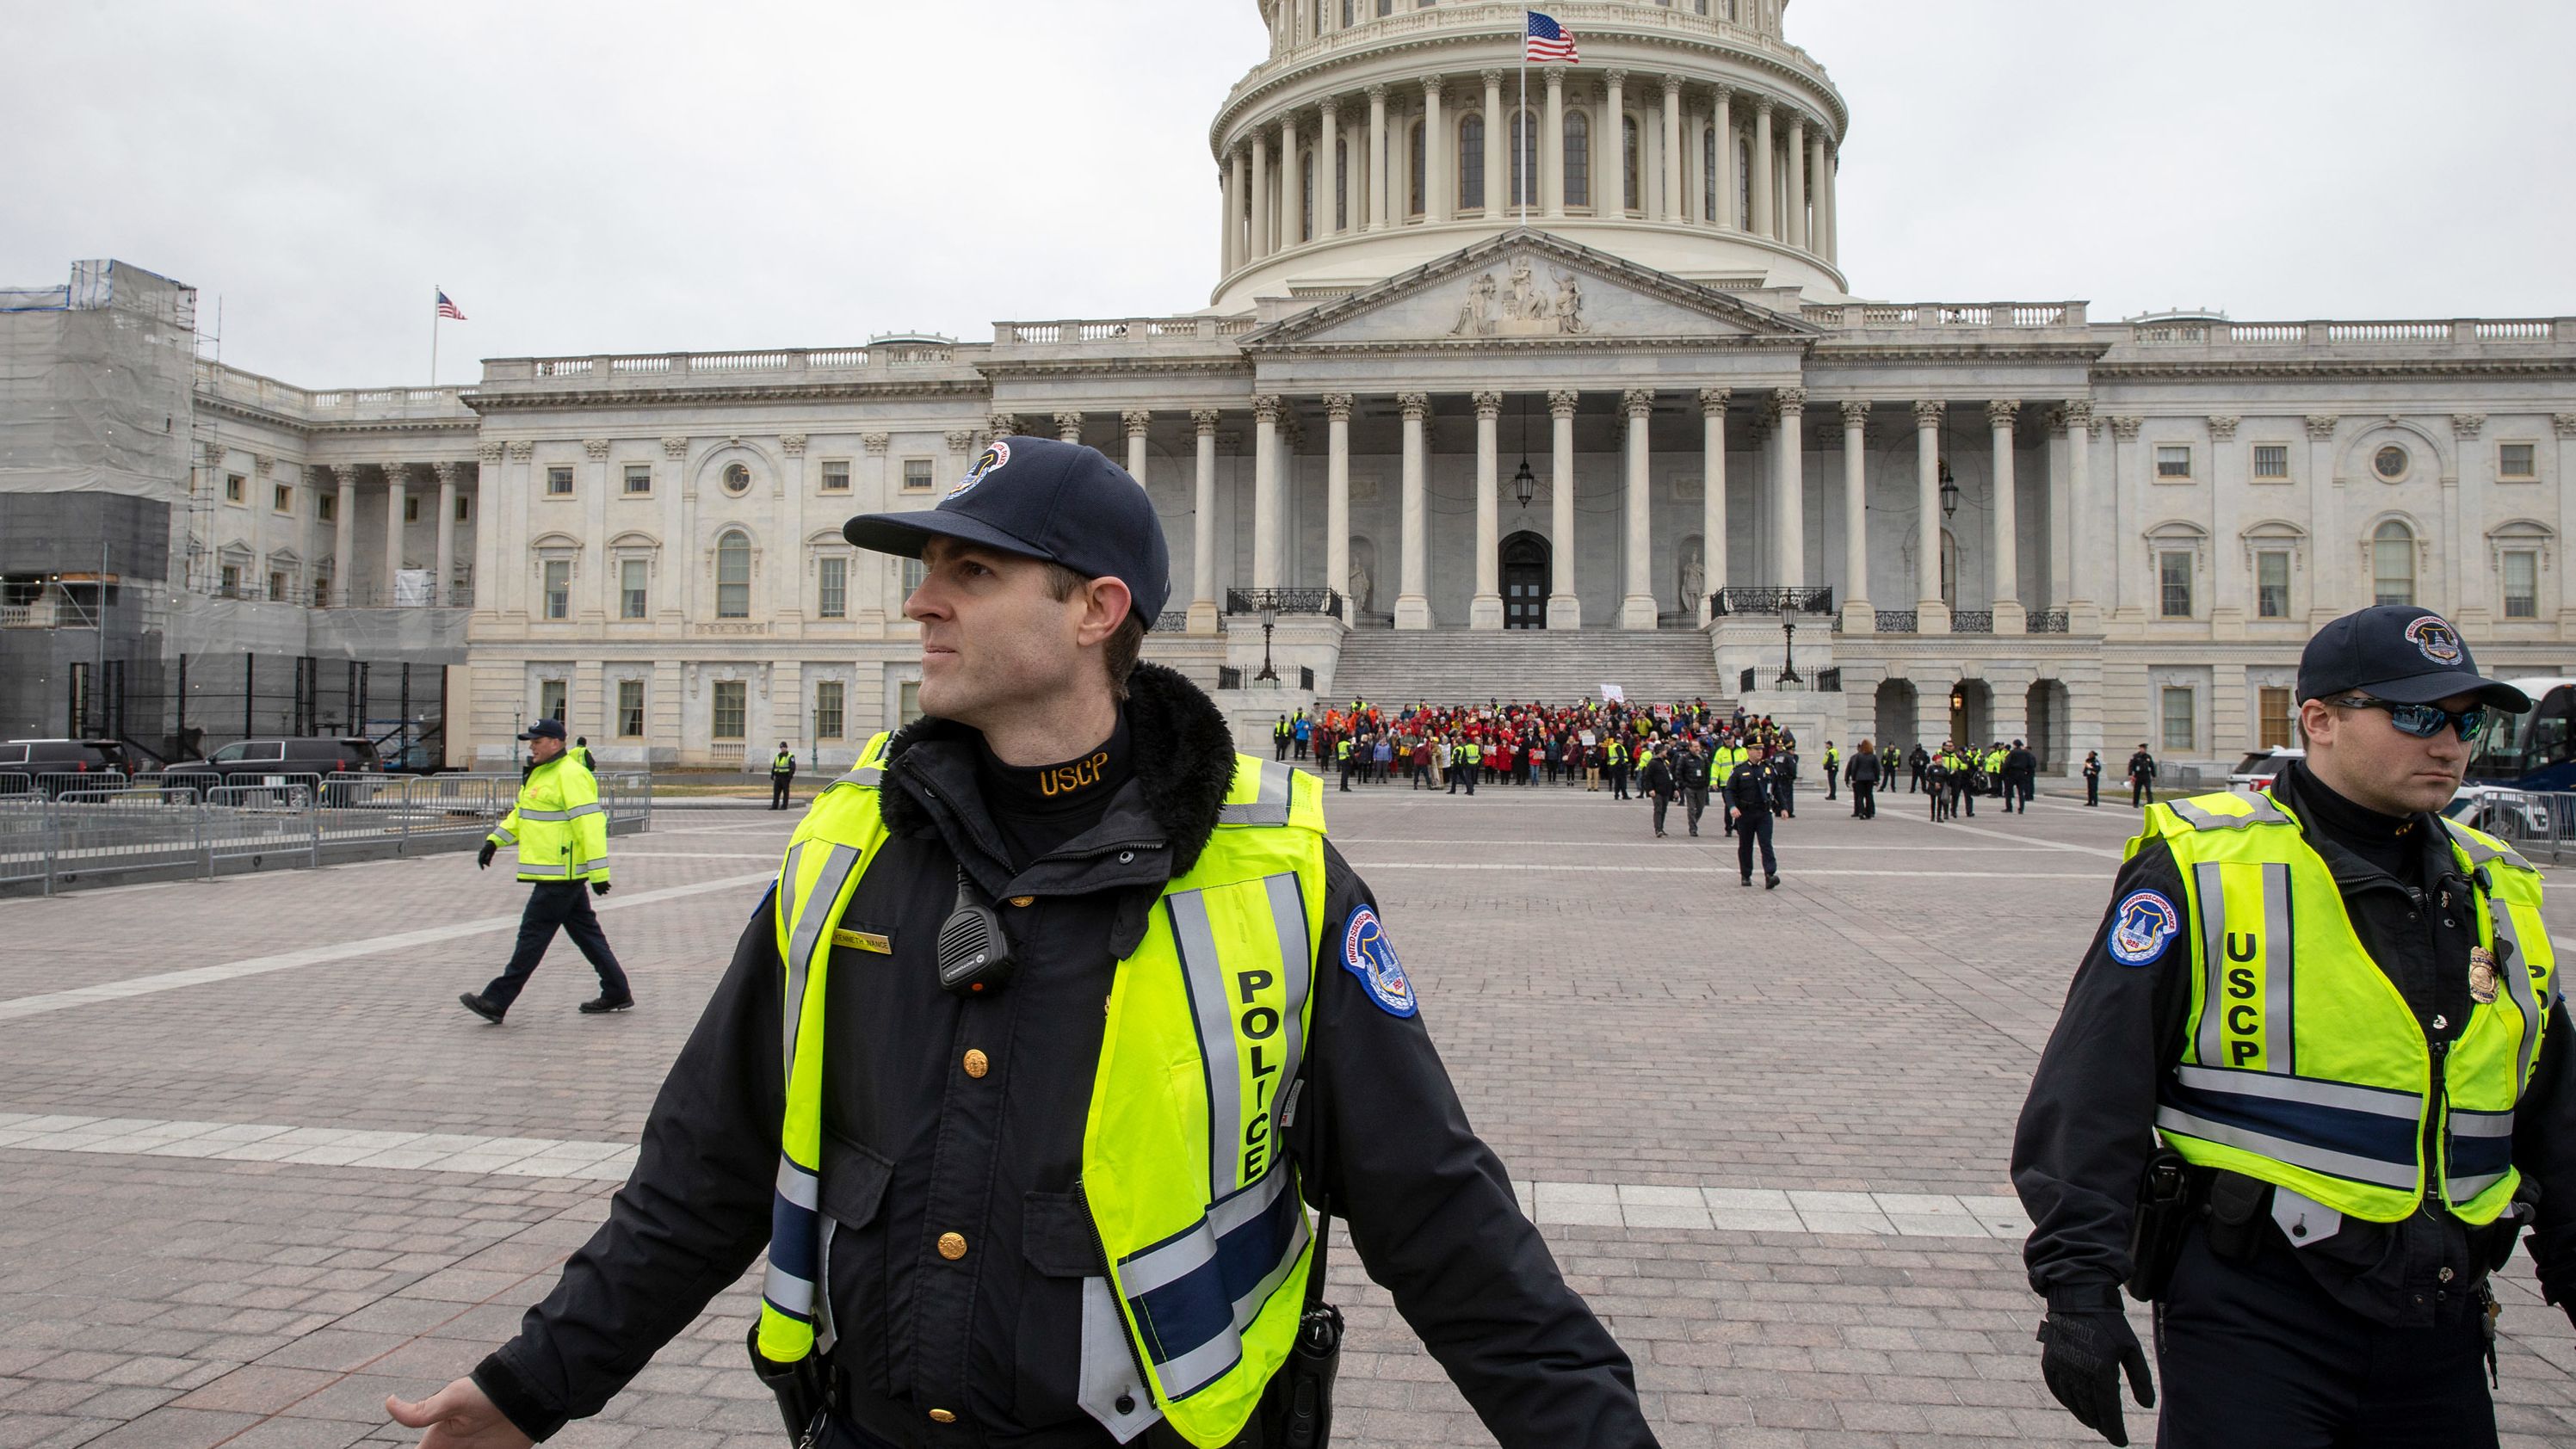 Police move back protesters at a climate change demonstration on Capitol Hill.